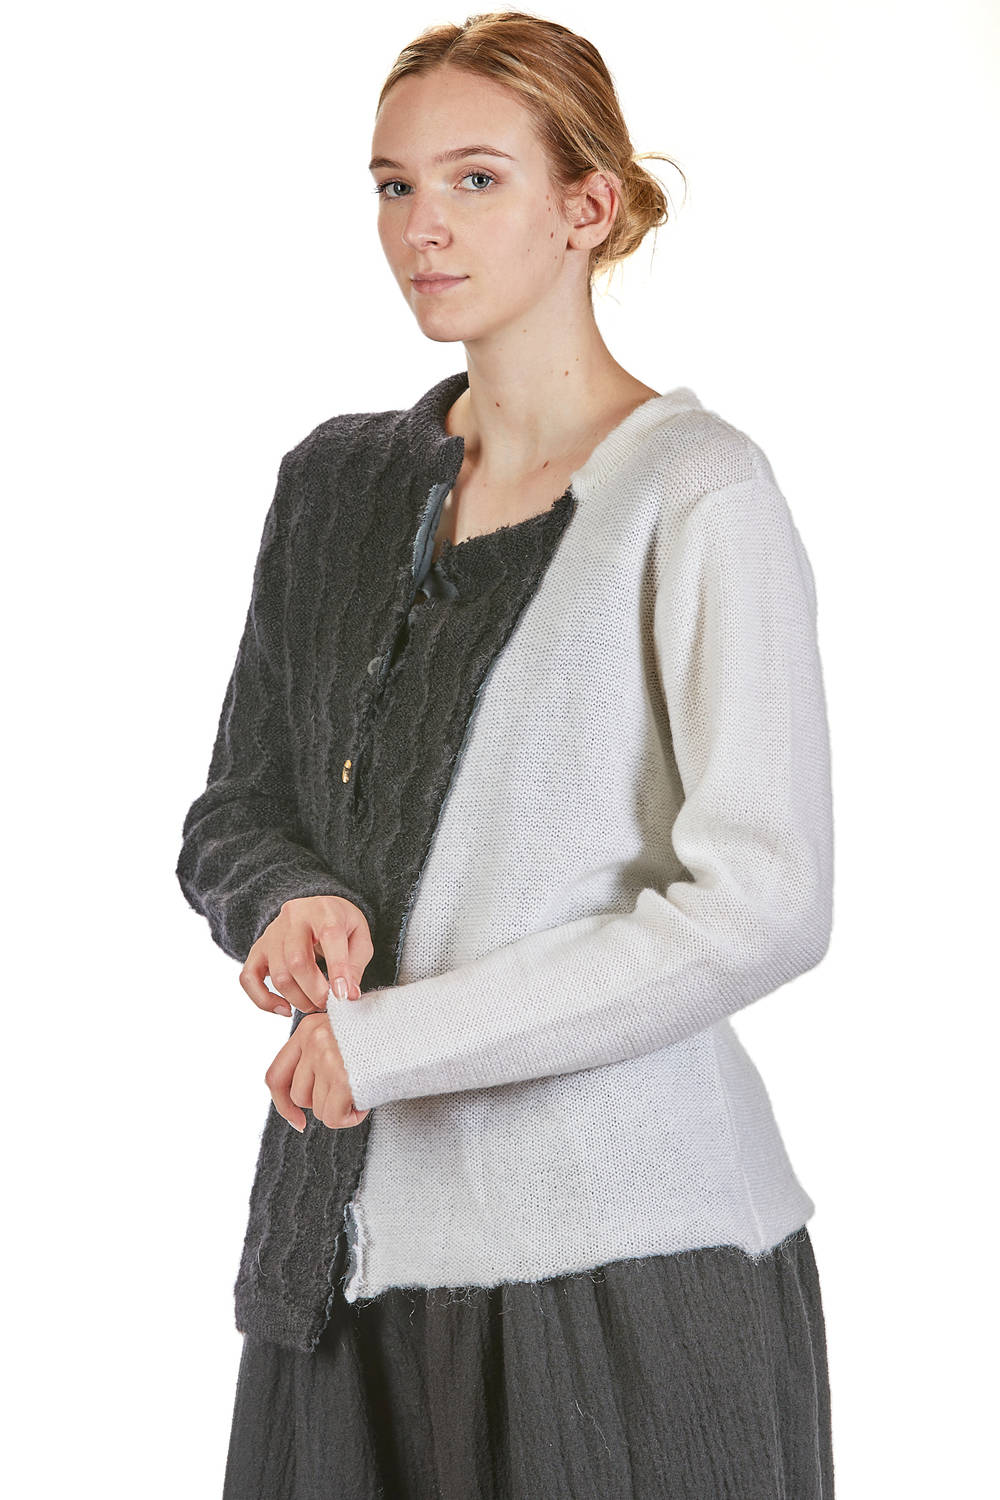 ARCHIVIO J. M. RIBOT - Hip-Length Sweater, Wide And Asymmetrical